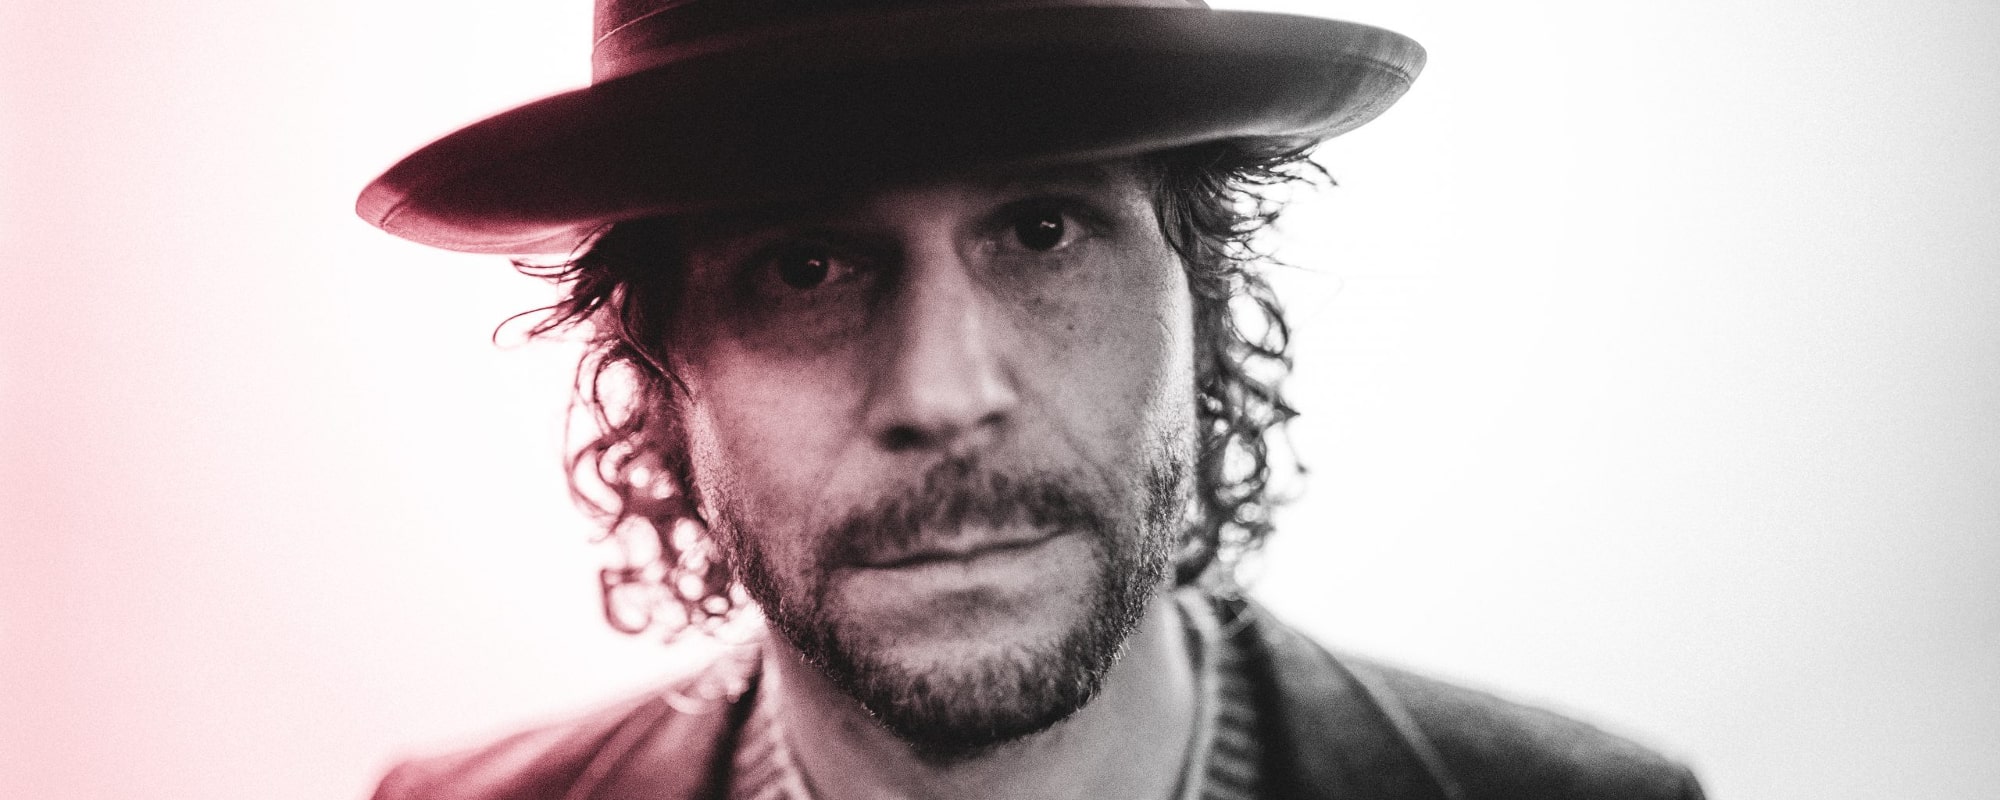 Langhorne Slim Premieres New Single “Panic Attack,” With an Accompanying Video